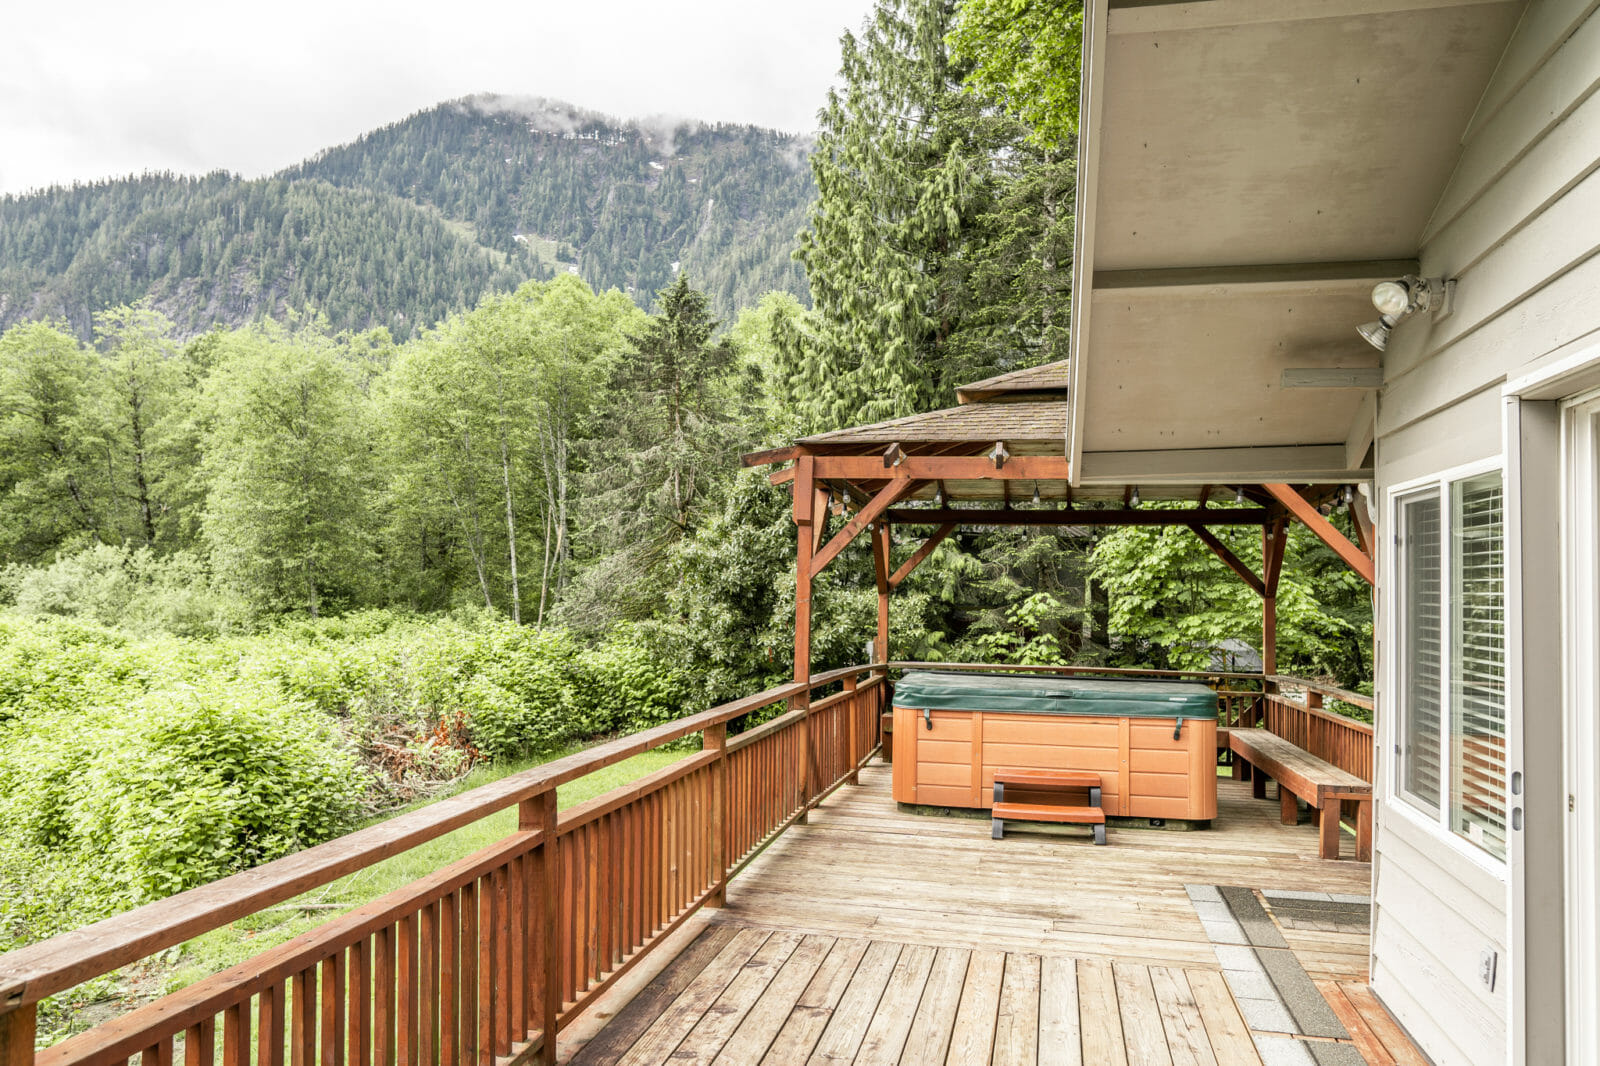 Soak Up Summer With The Ultimate River Views And Hot Tub In This